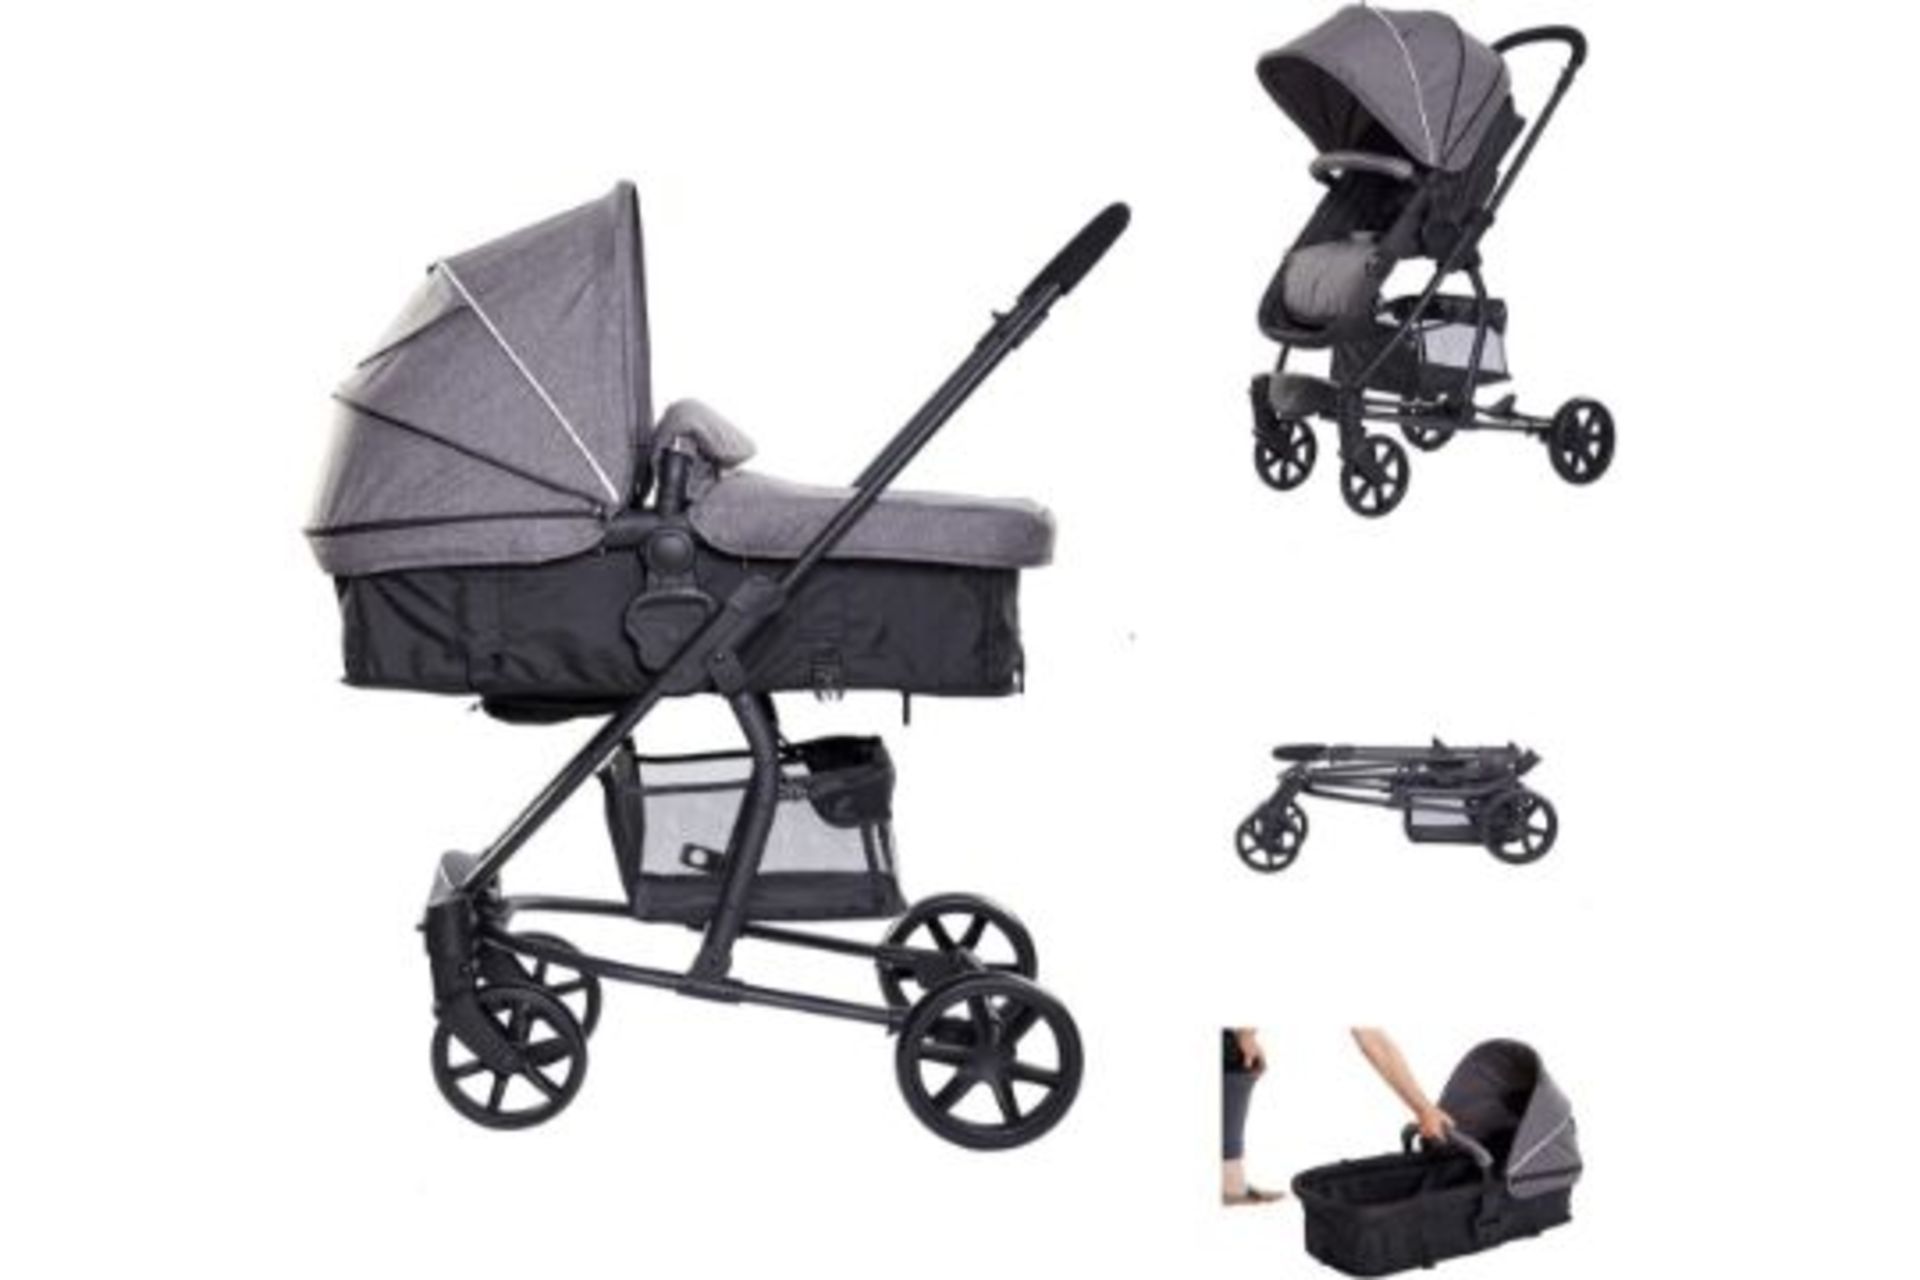 TRADE LOT 5 X BRAND NEW RICCO BABY 2 IN 1 FOLDABLE BUGGY STROLLER PUSHCHAIR GREY R18-7